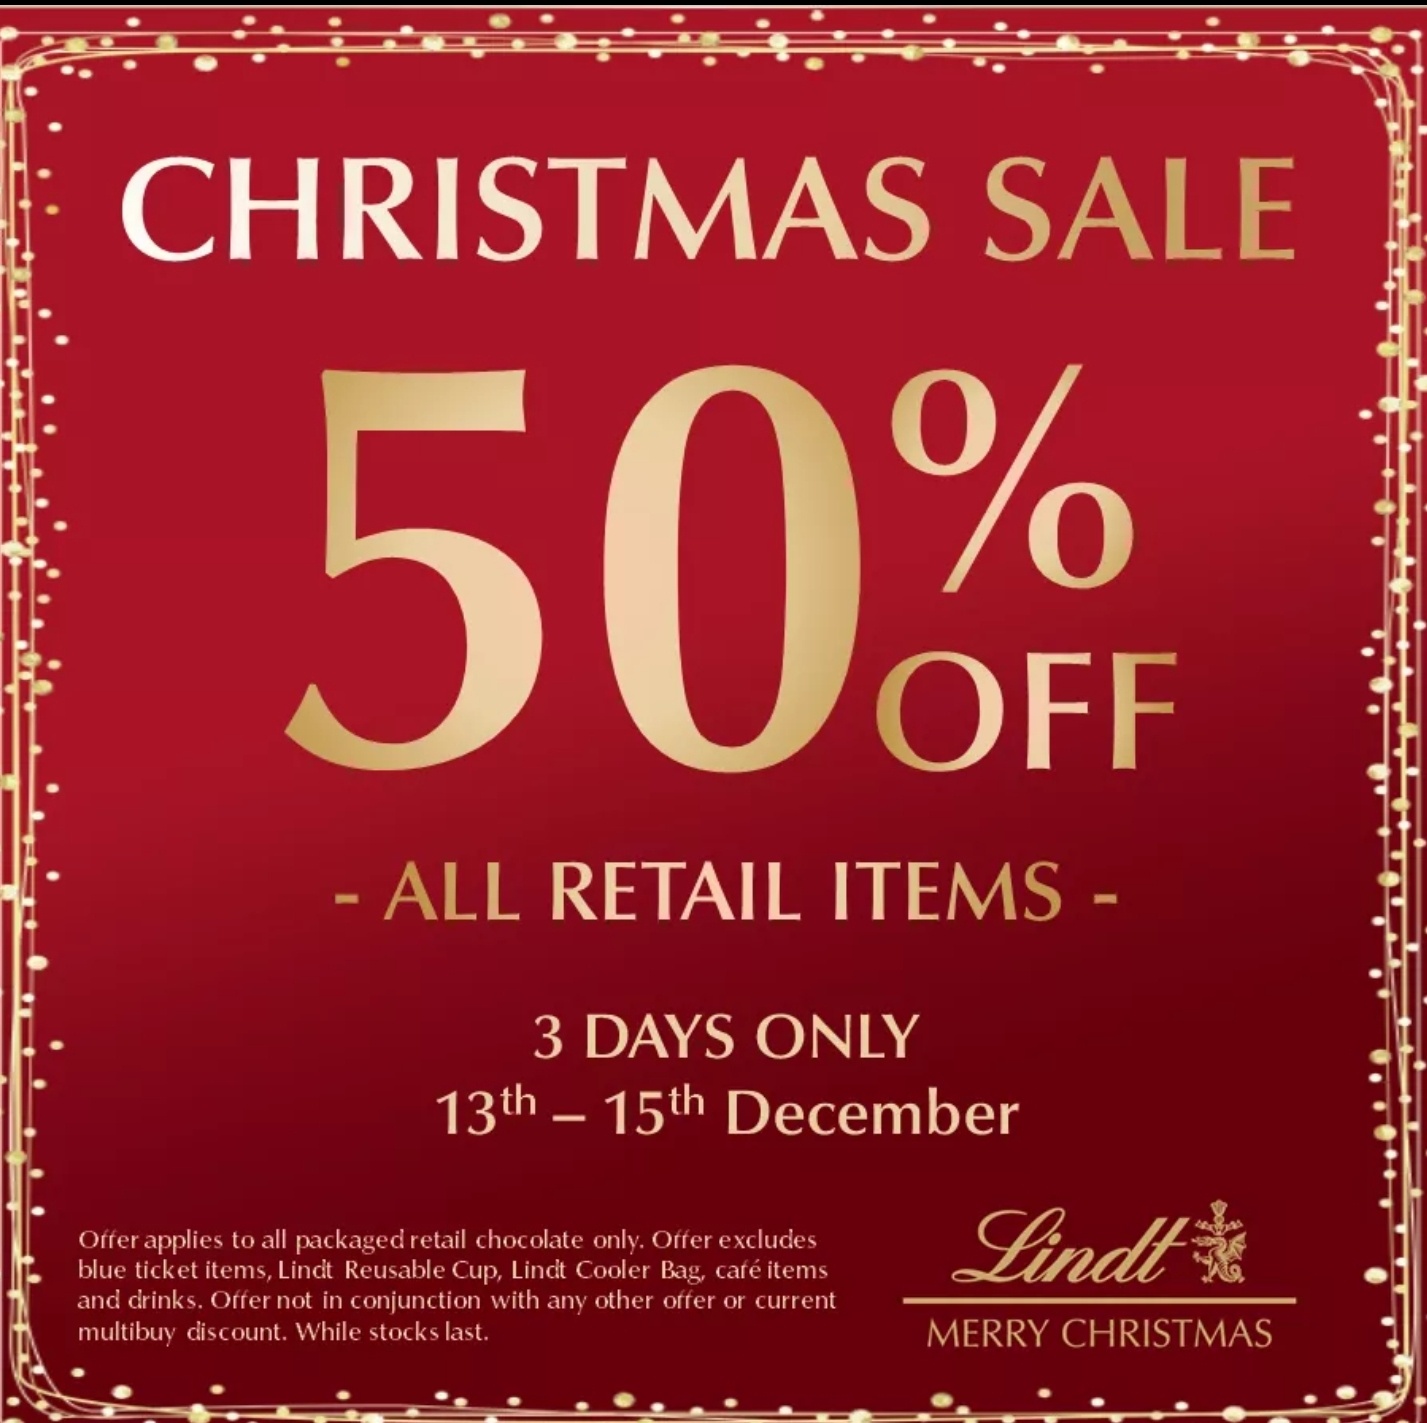 DEAL: Lindt Chocolate Shops - 50% off Retail Items from 13-15 December 2019 4